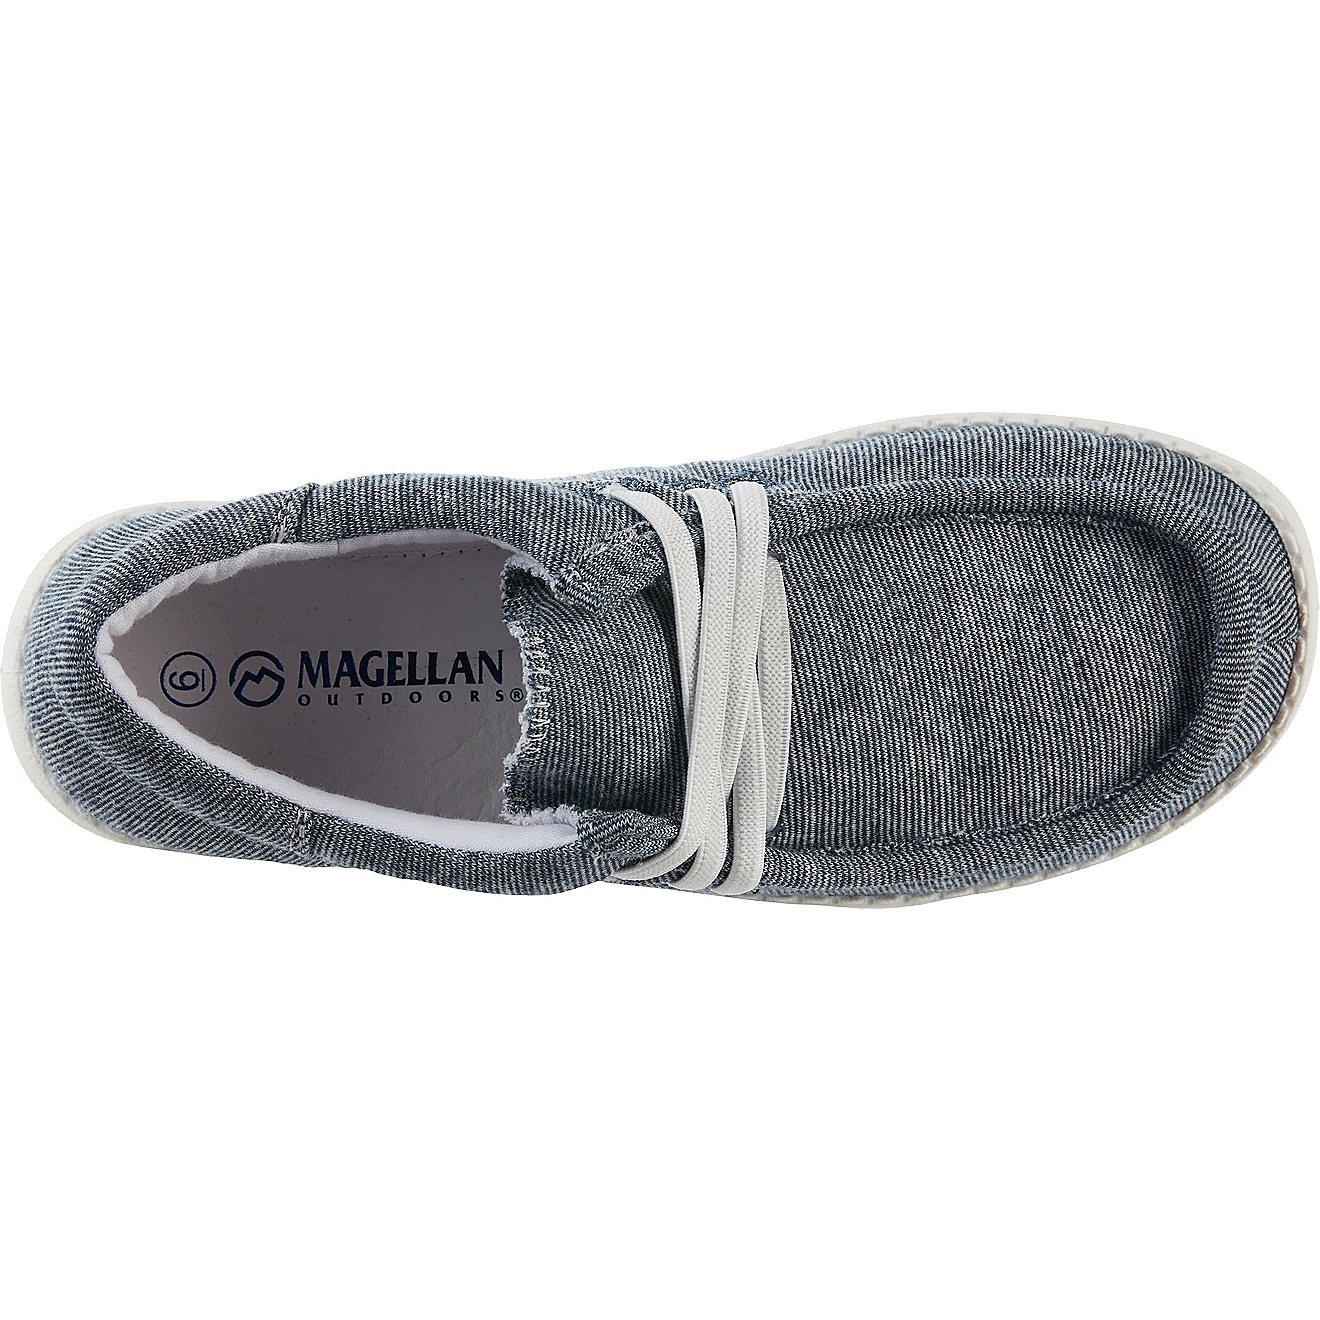 Magellan Outdoors Women's Moc Toe Shoes                                                                                          - view number 3